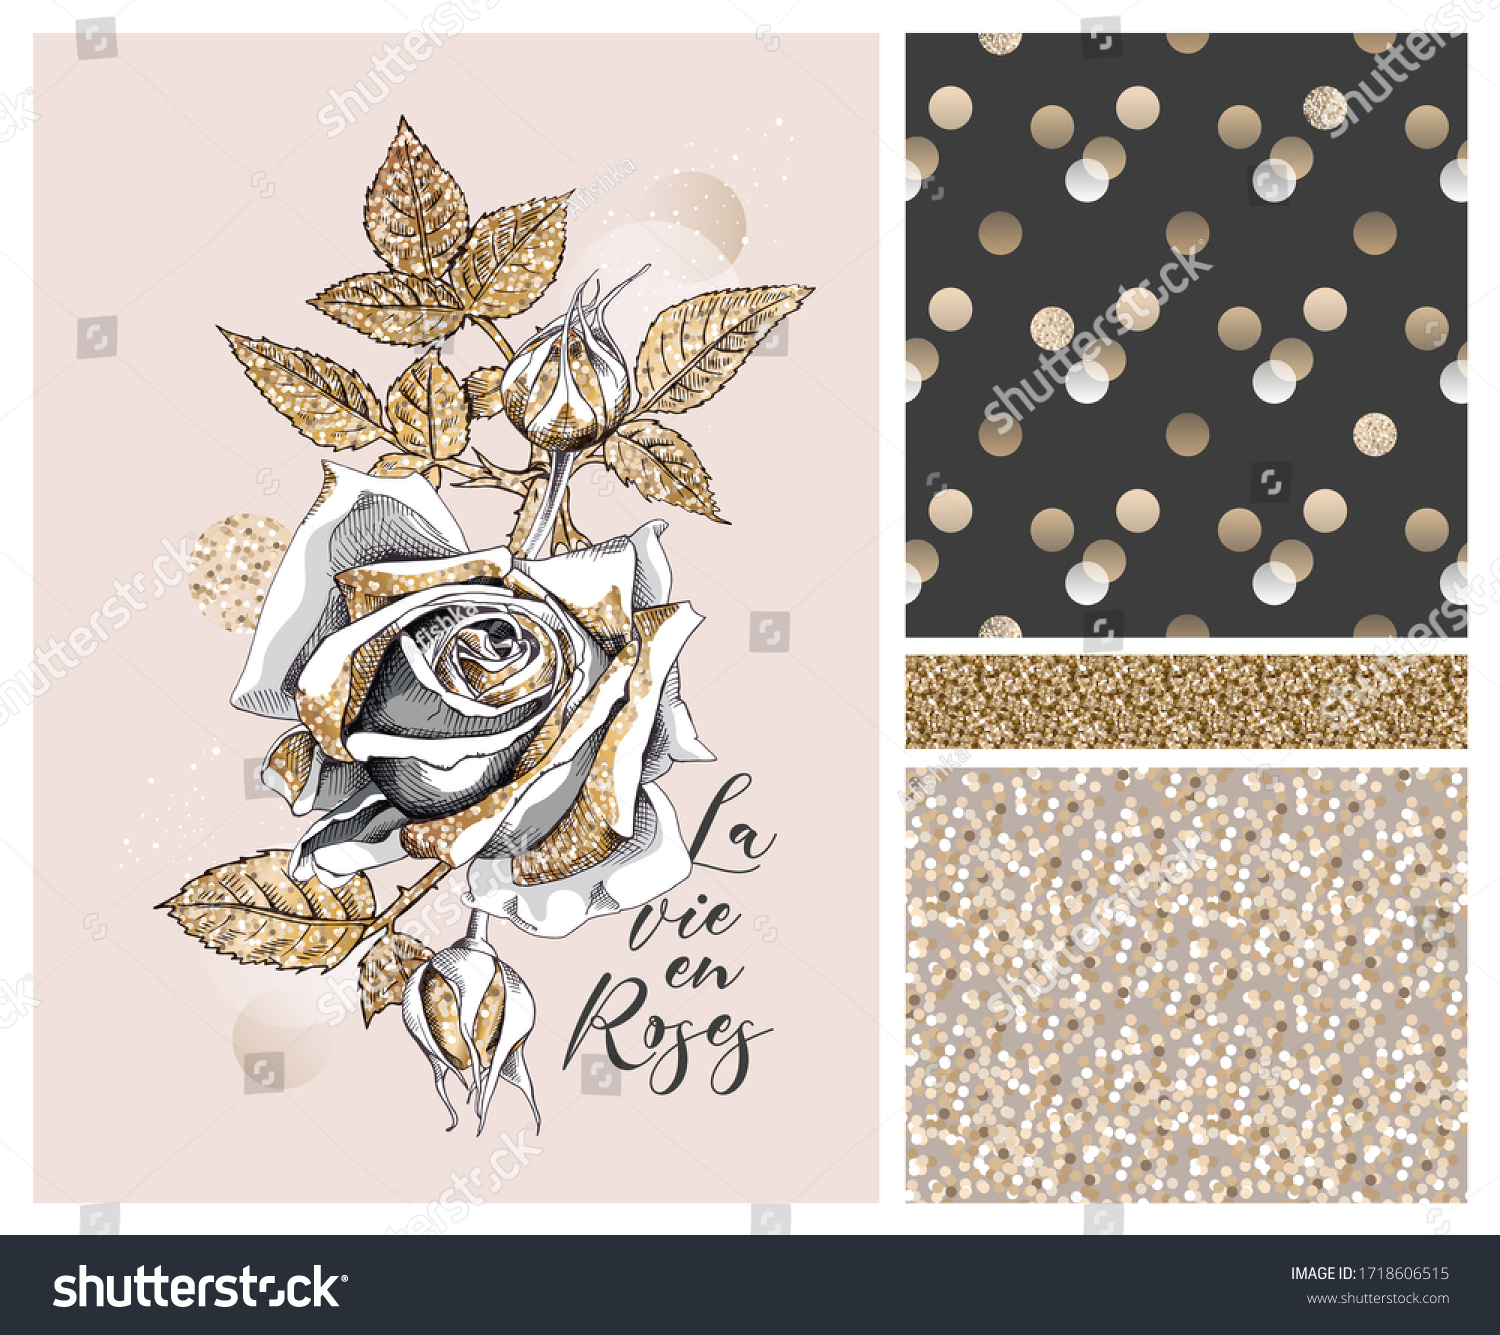 SVG of Collection of print and seamless textures. Gold glitter Rose flower, buds and leaves. La vie en roses (French) - lettering quote.Textile composition, hand drawn style print. Vector illustration. svg